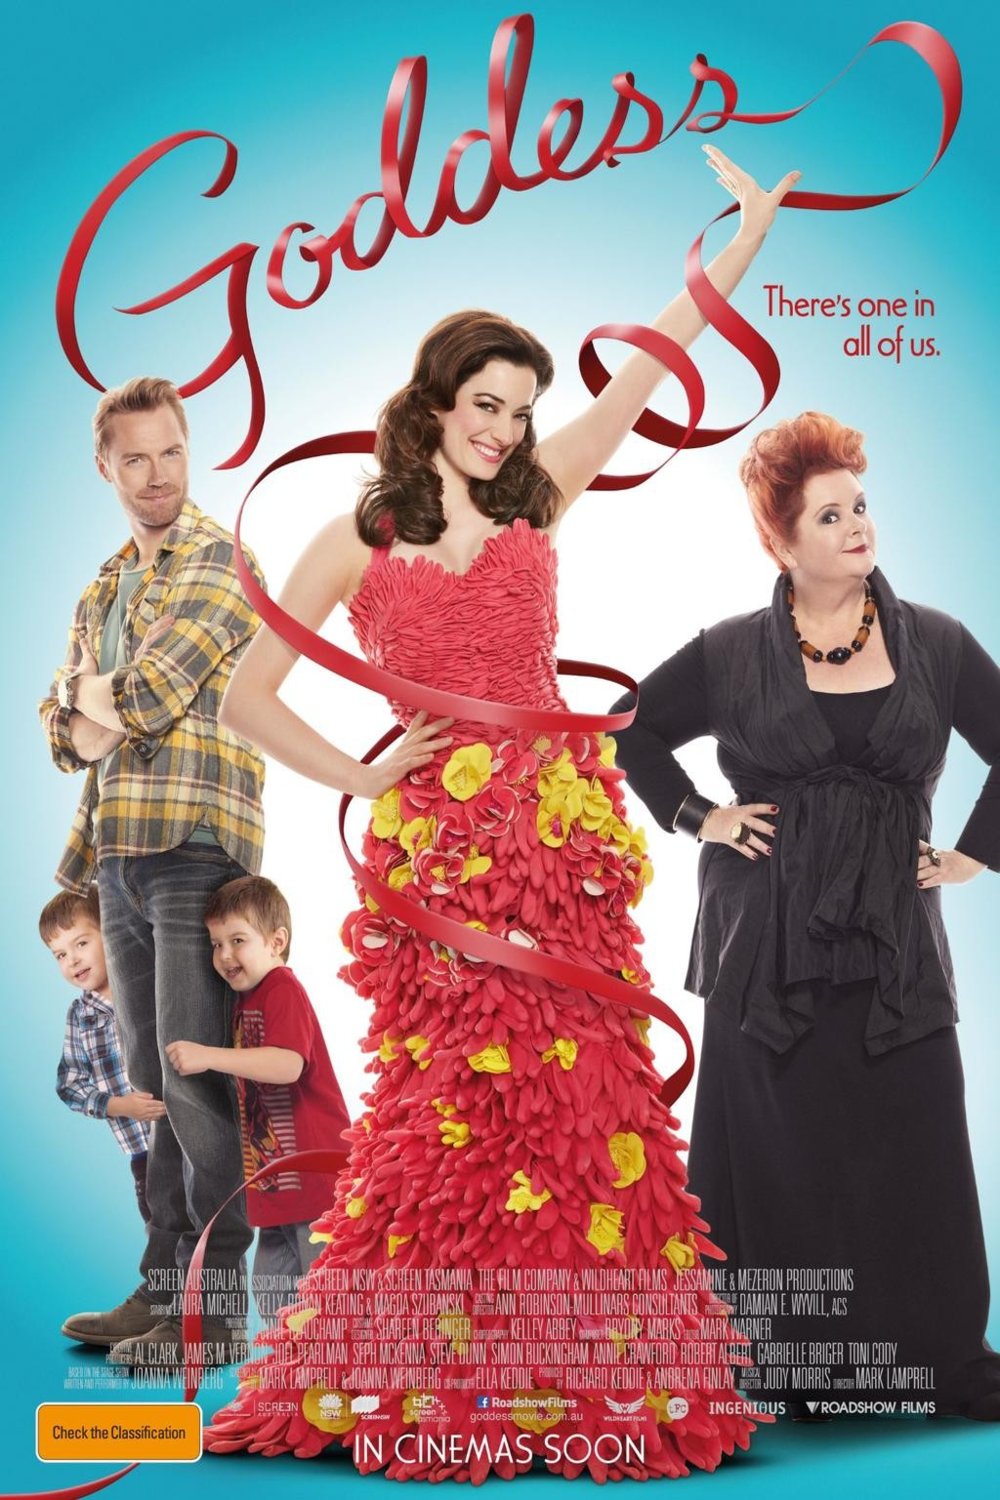 Poster of the movie Goddess